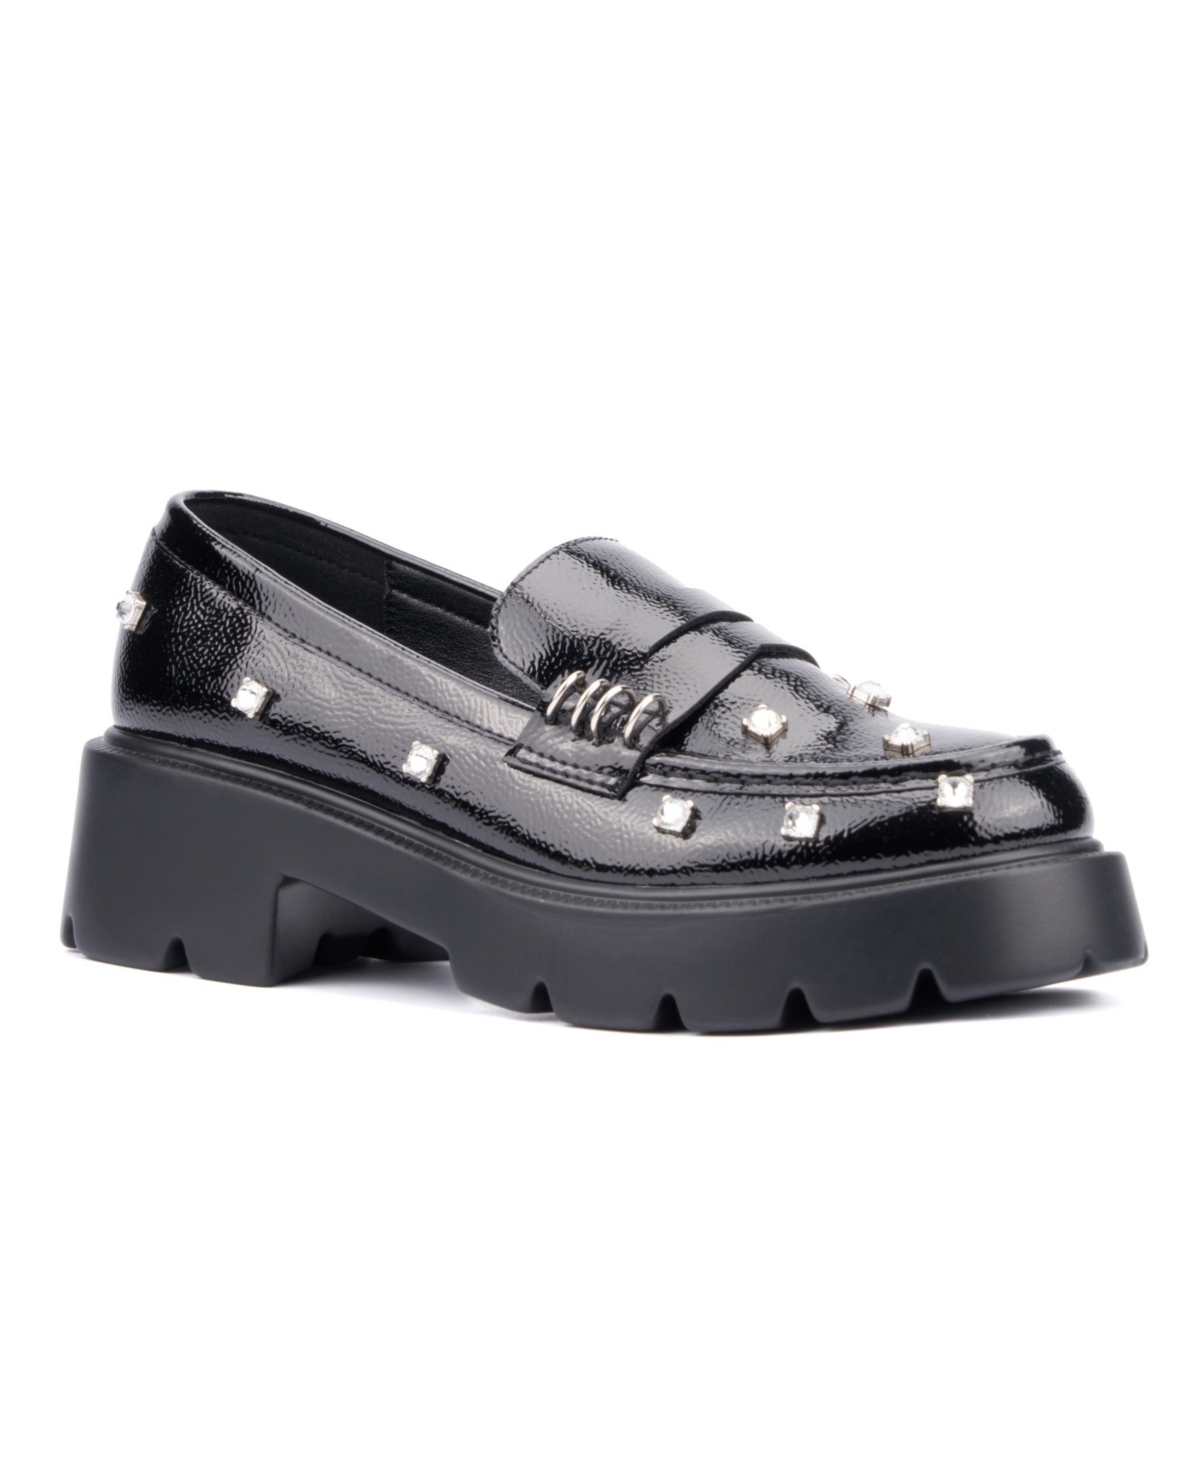 Women's Luscious Loafer - Black